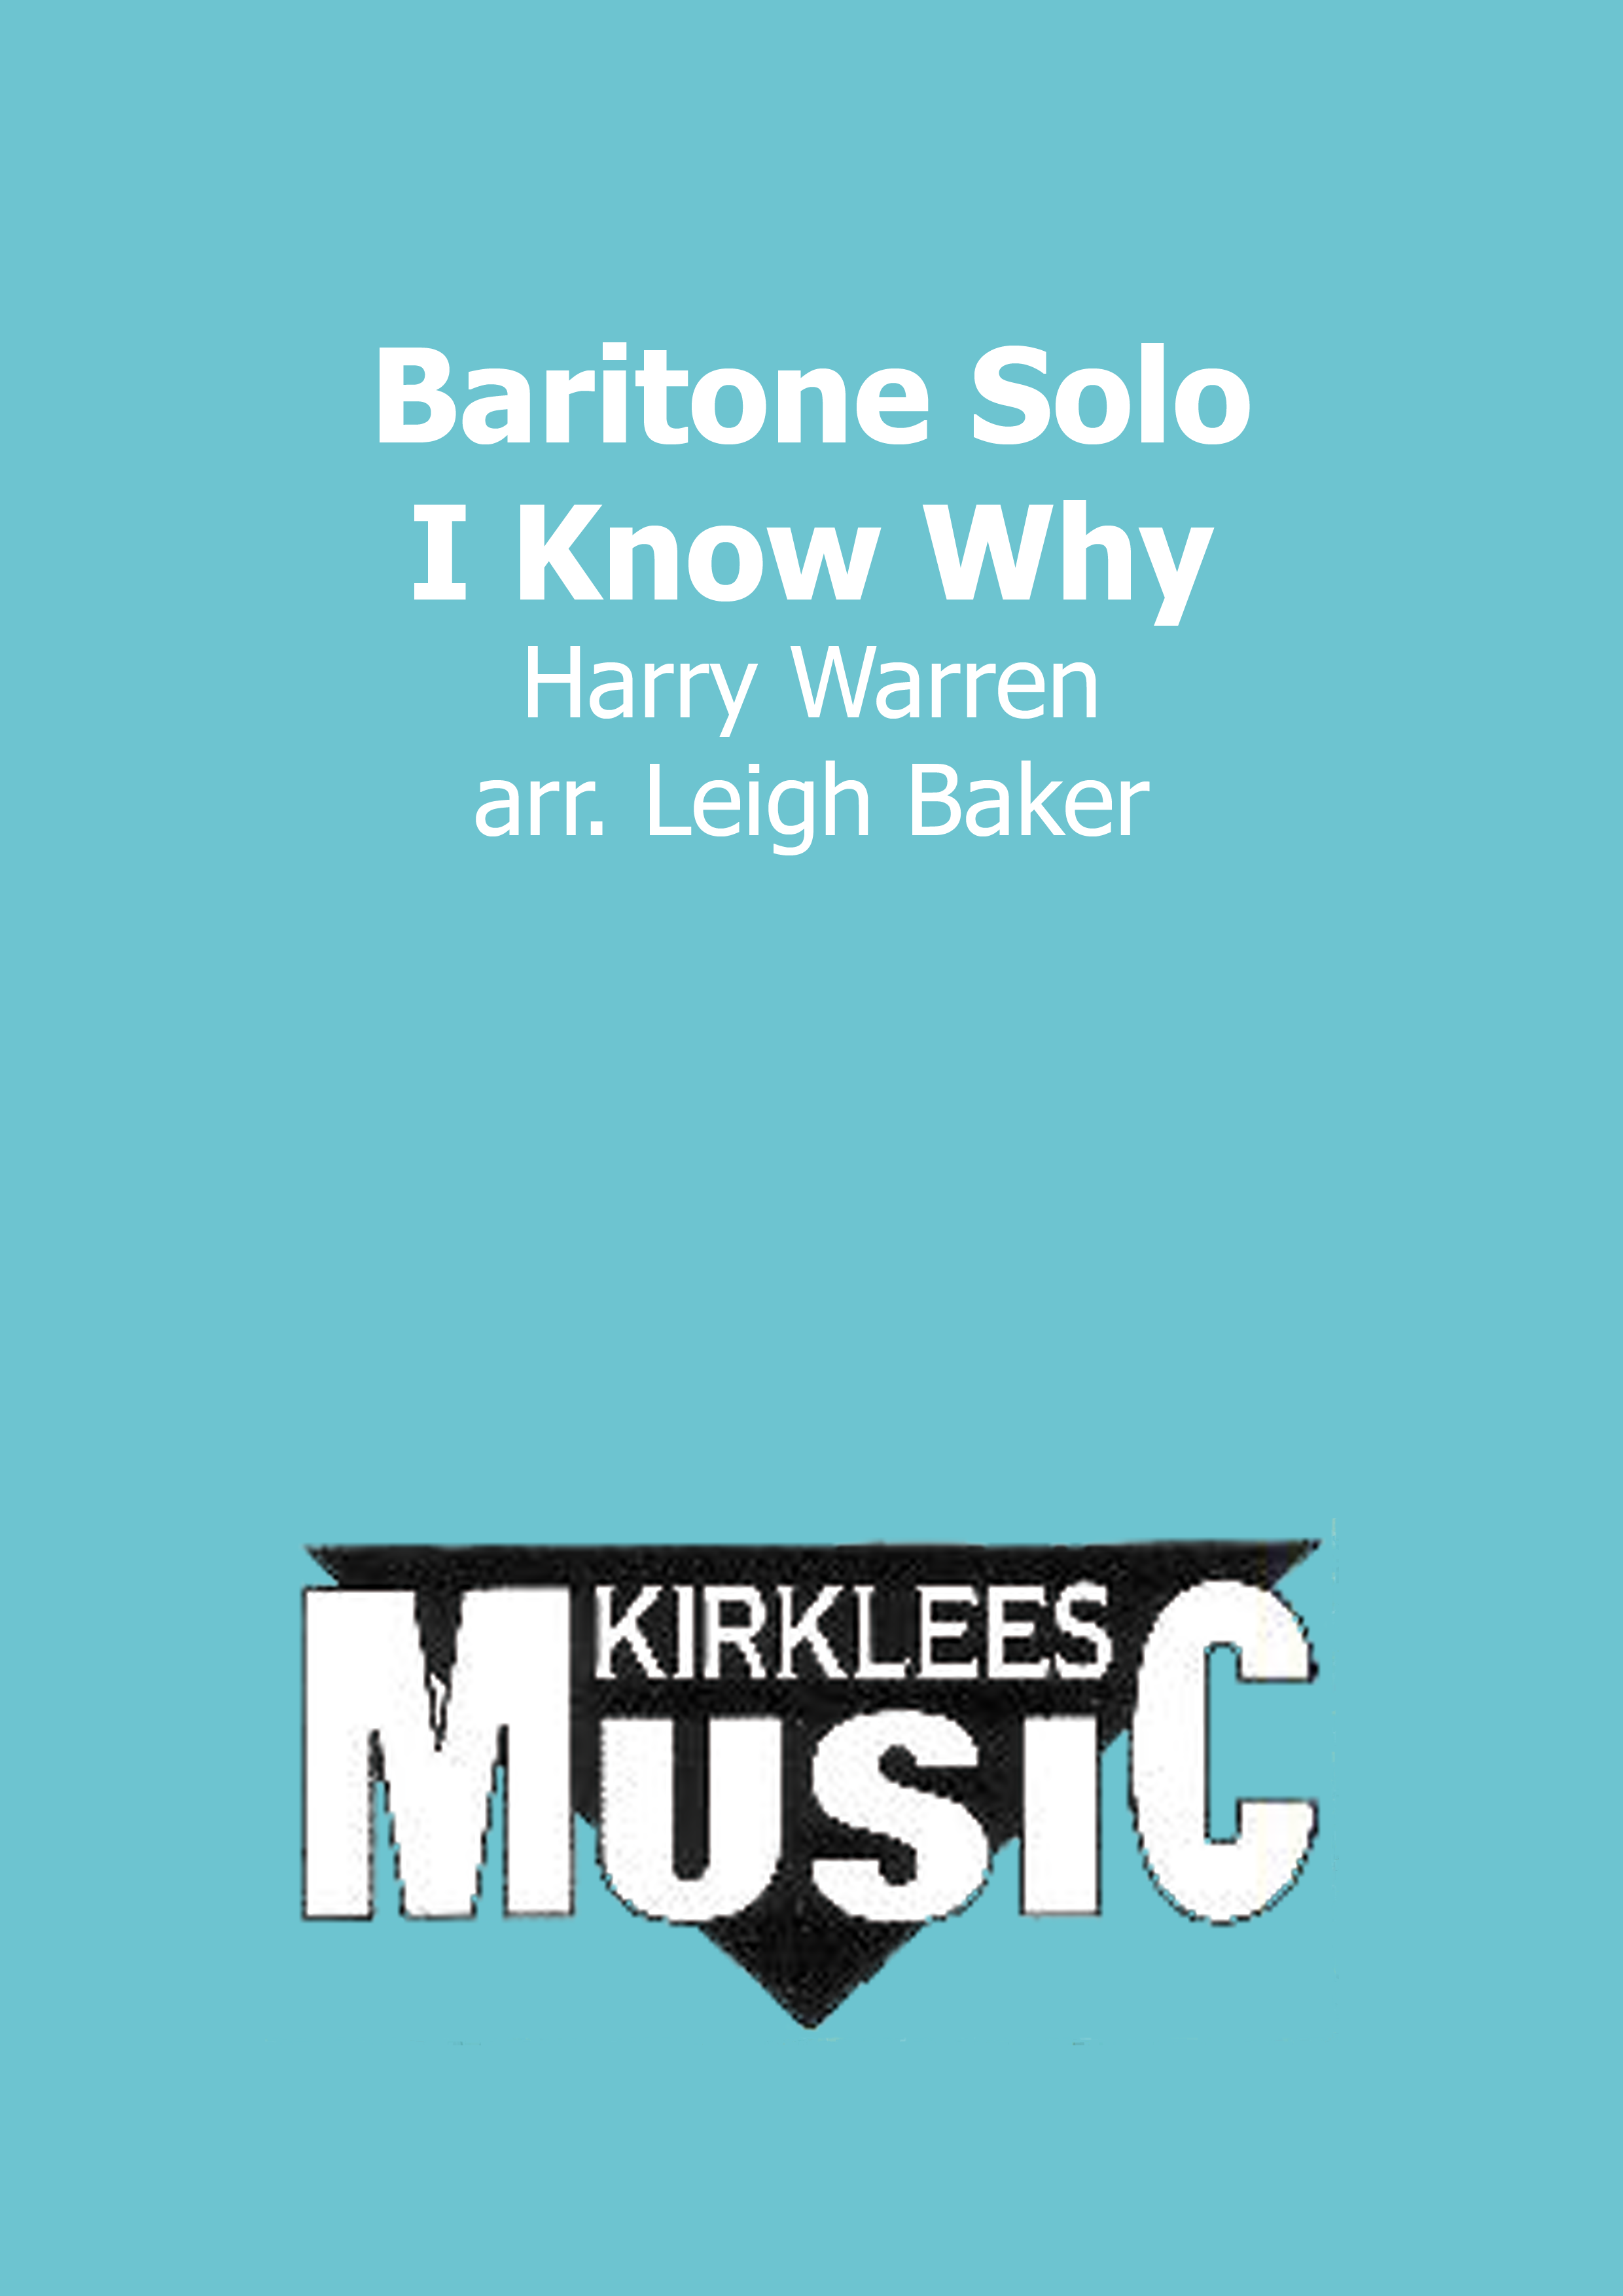 I Know Why (Baritone Solo with Brass Band - Score and Parts)